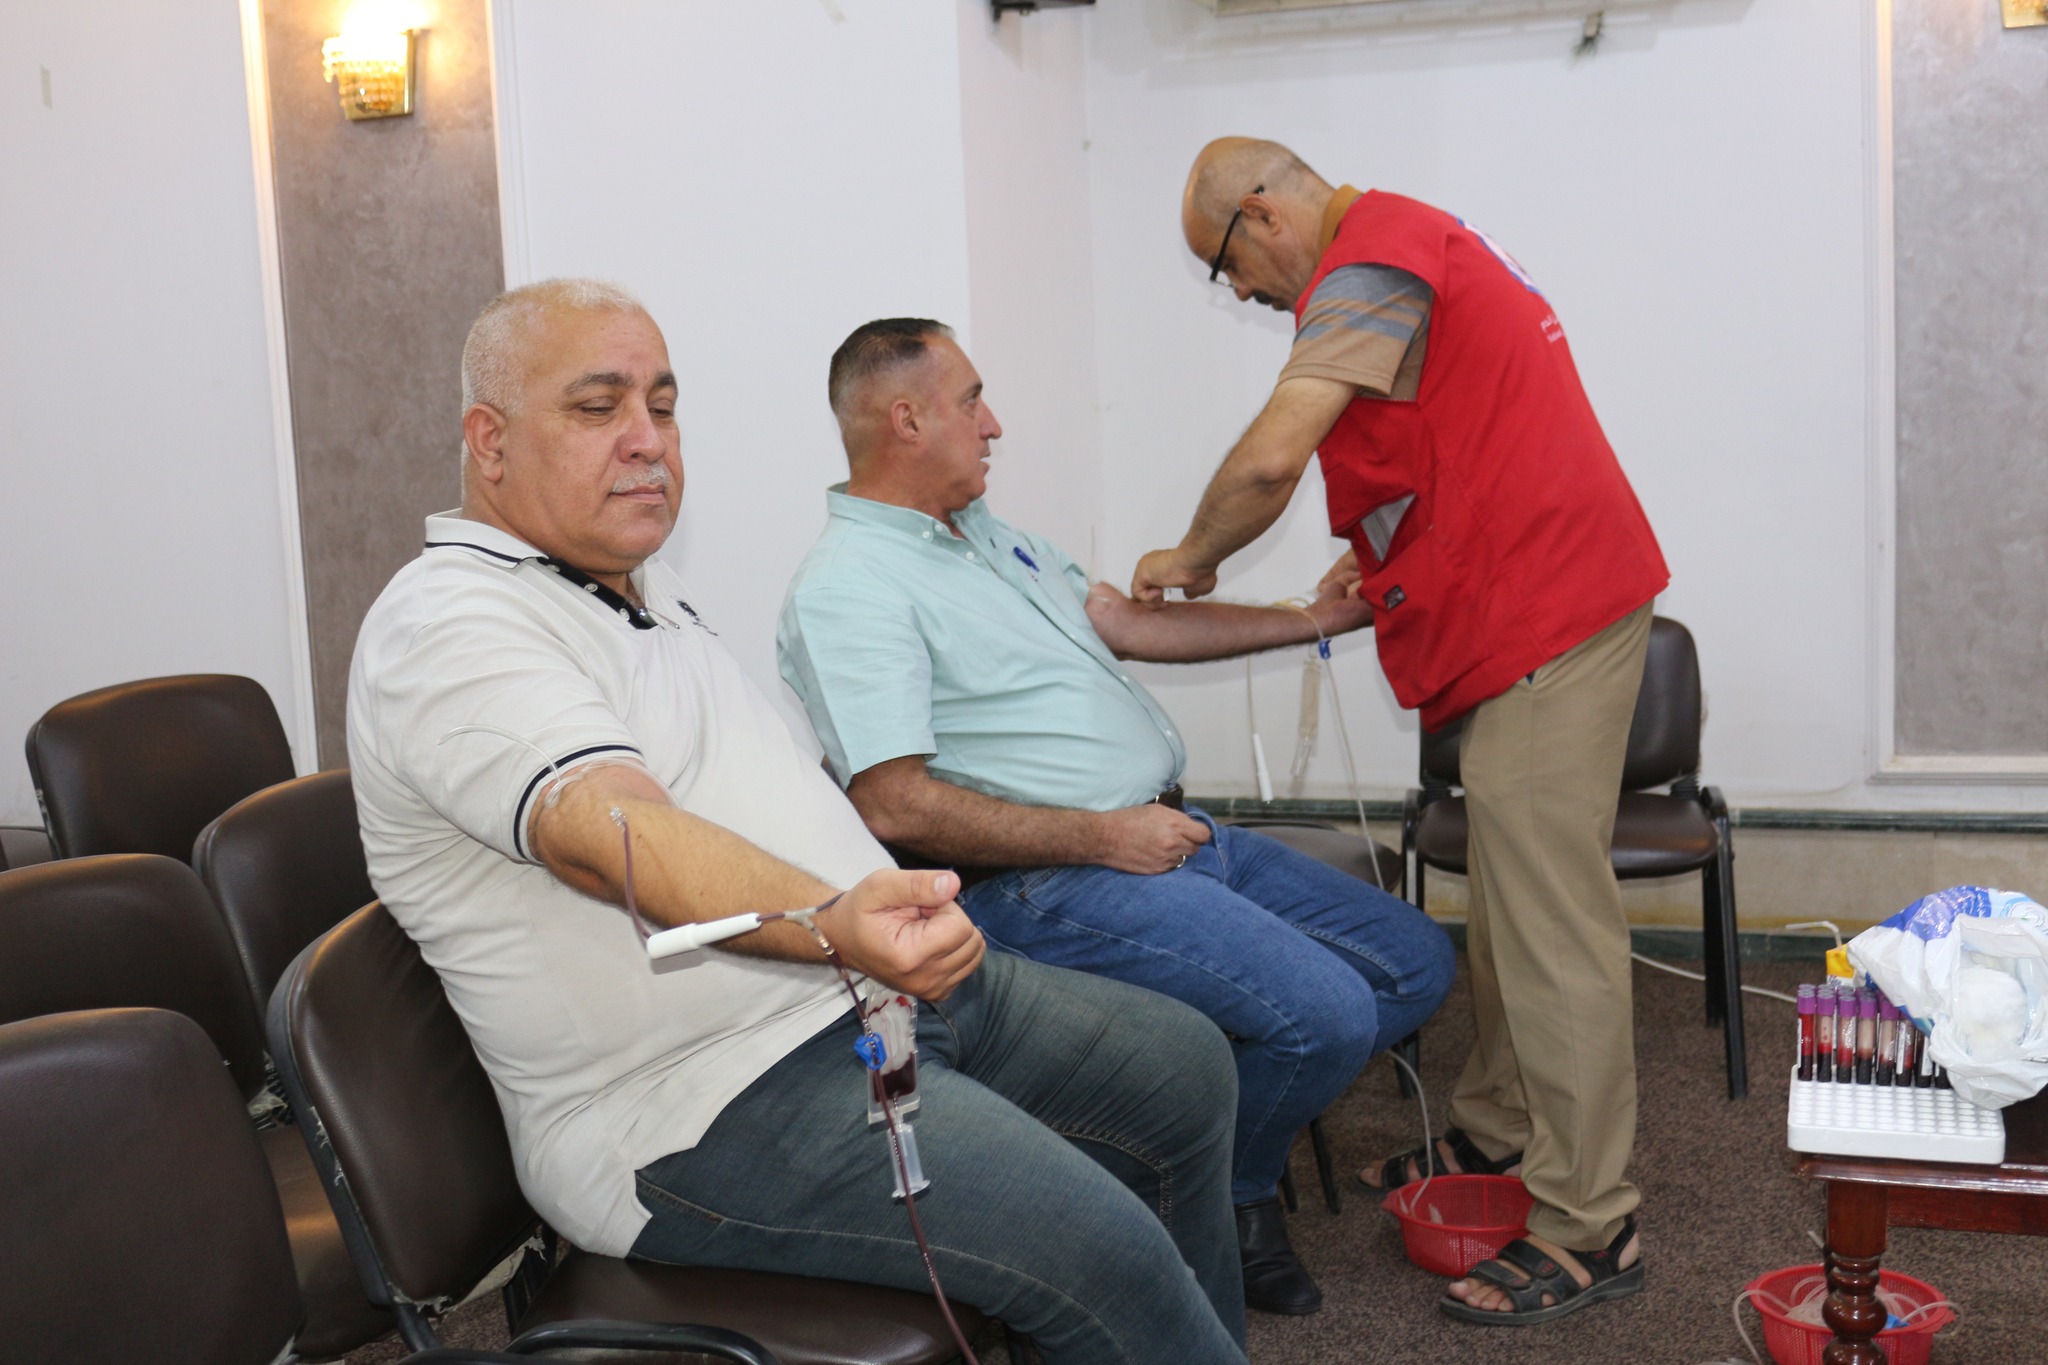 A number of AL-FAO employees donated blood out of their belief in consolidating the spirit of cooperation and social solidarity among the people